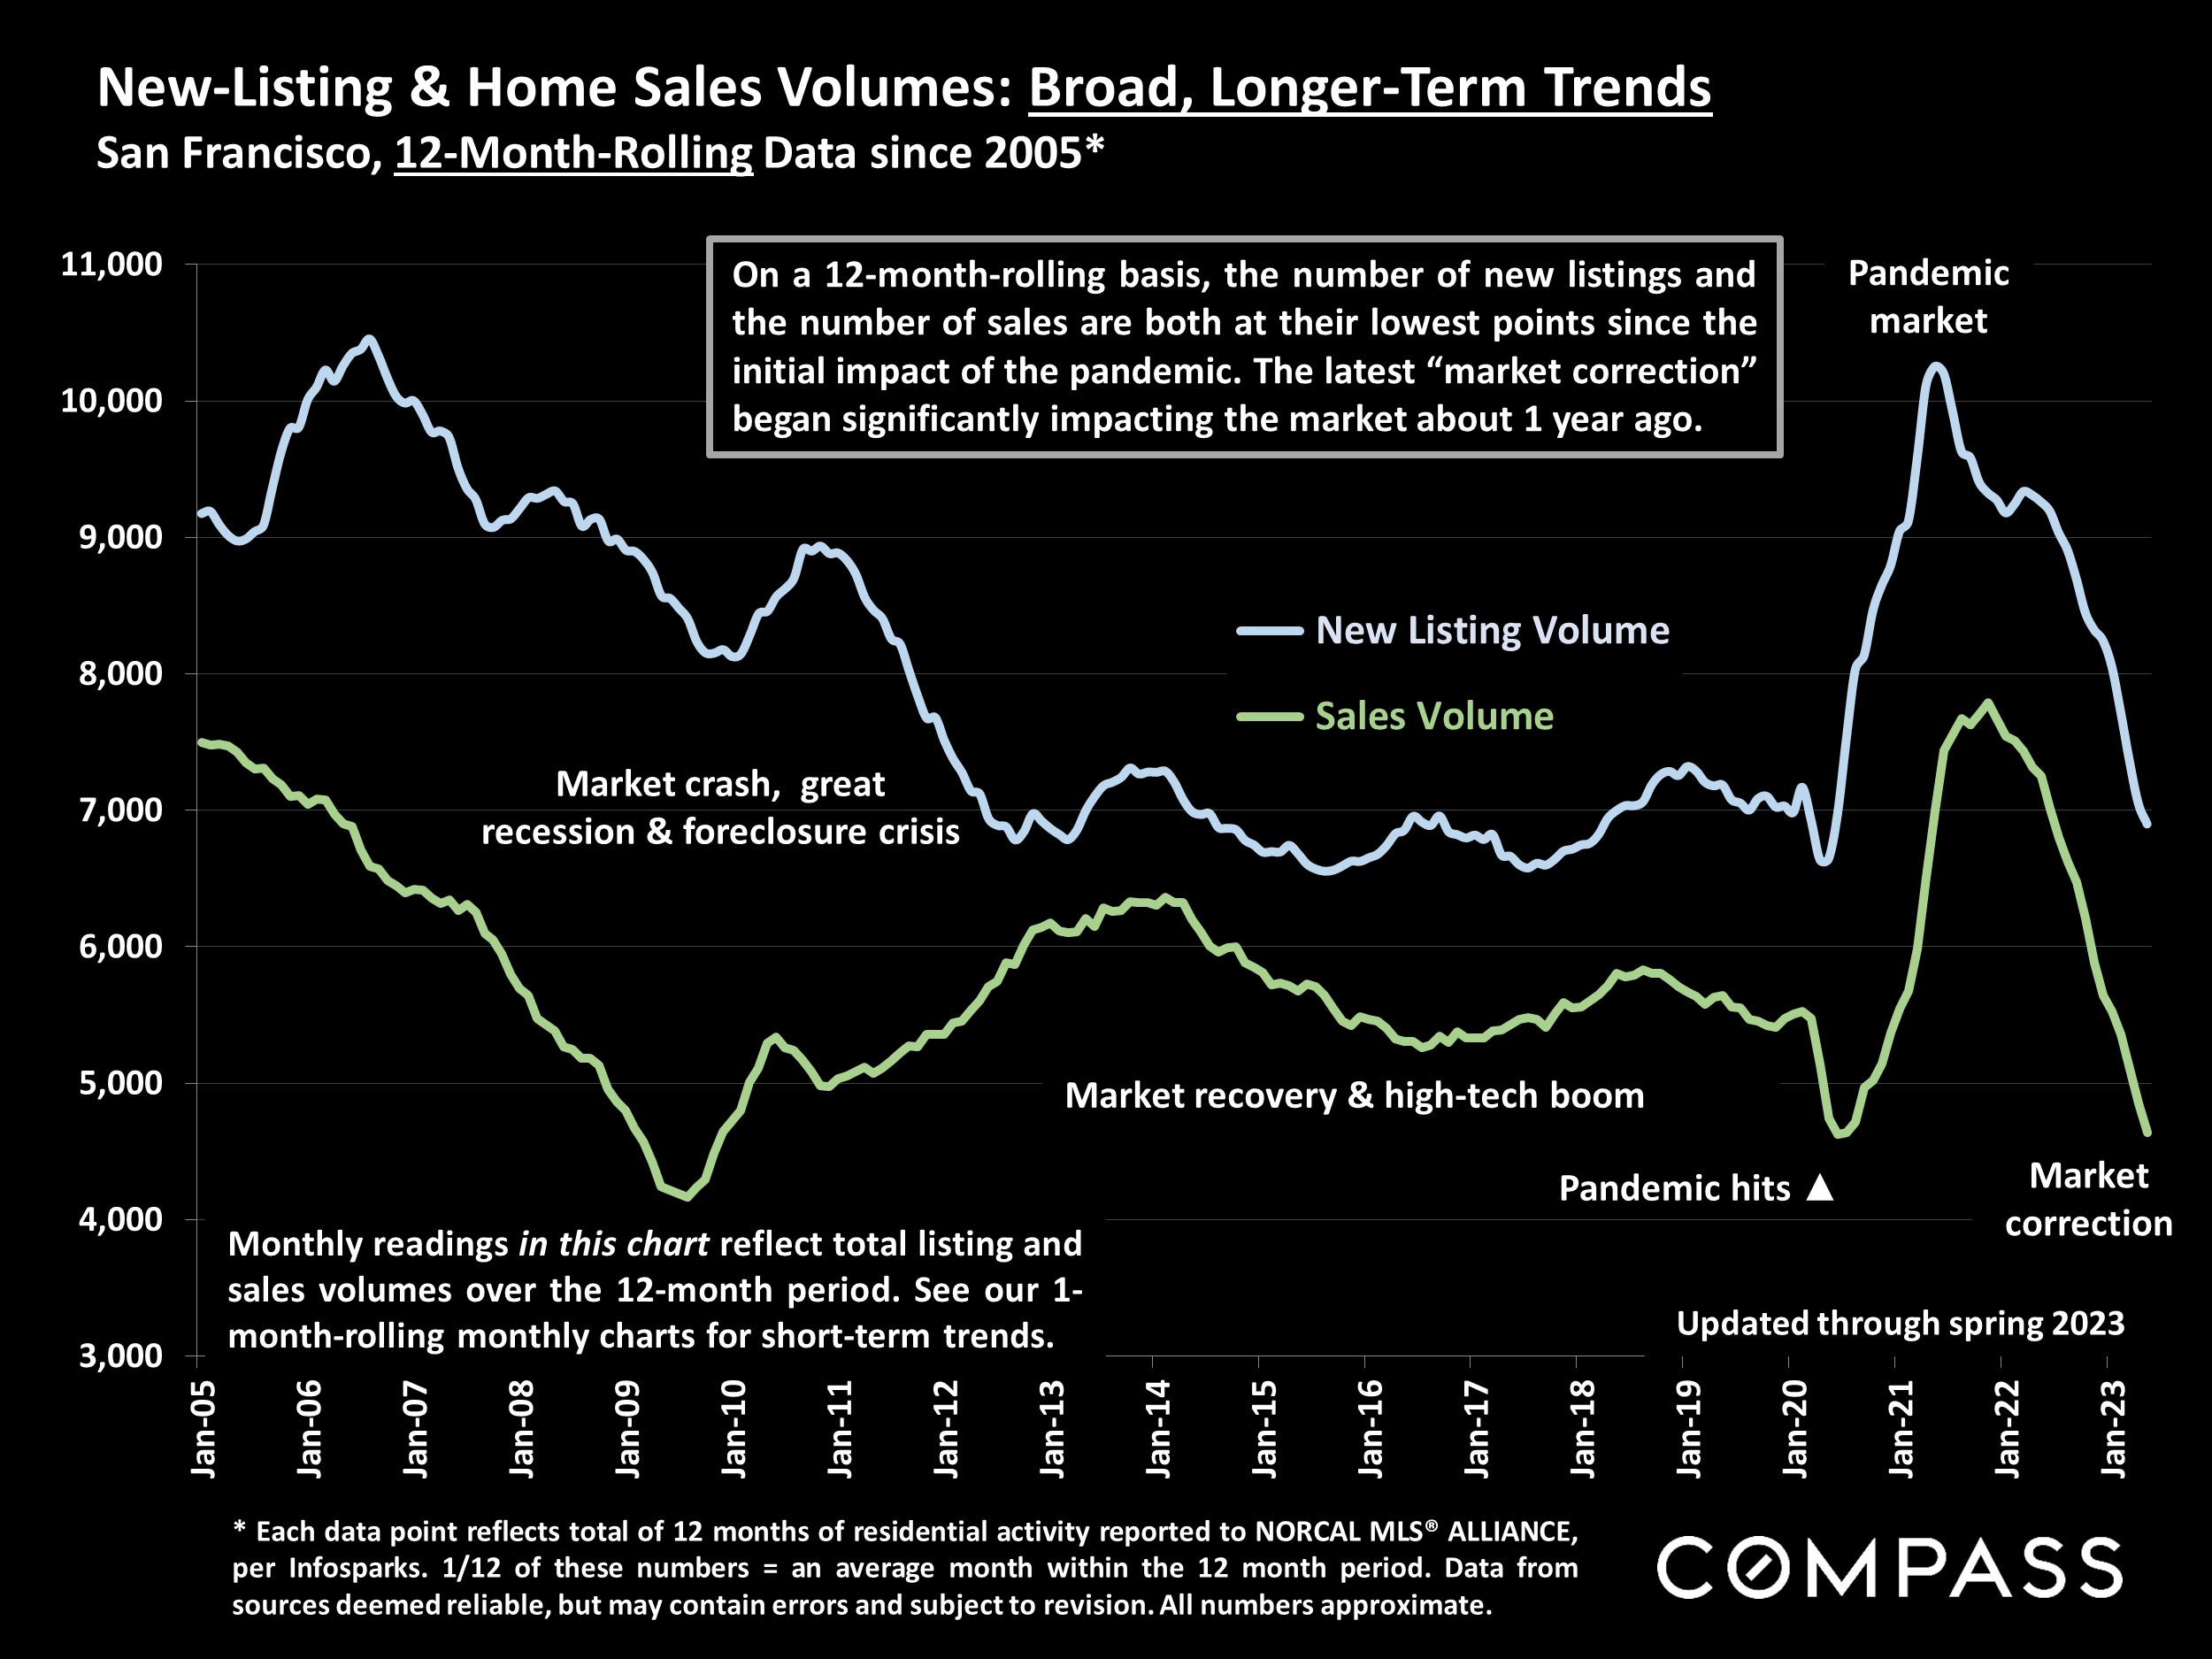 New-Listing & Home Sales Volumes: Broad, Longer-Term Trends